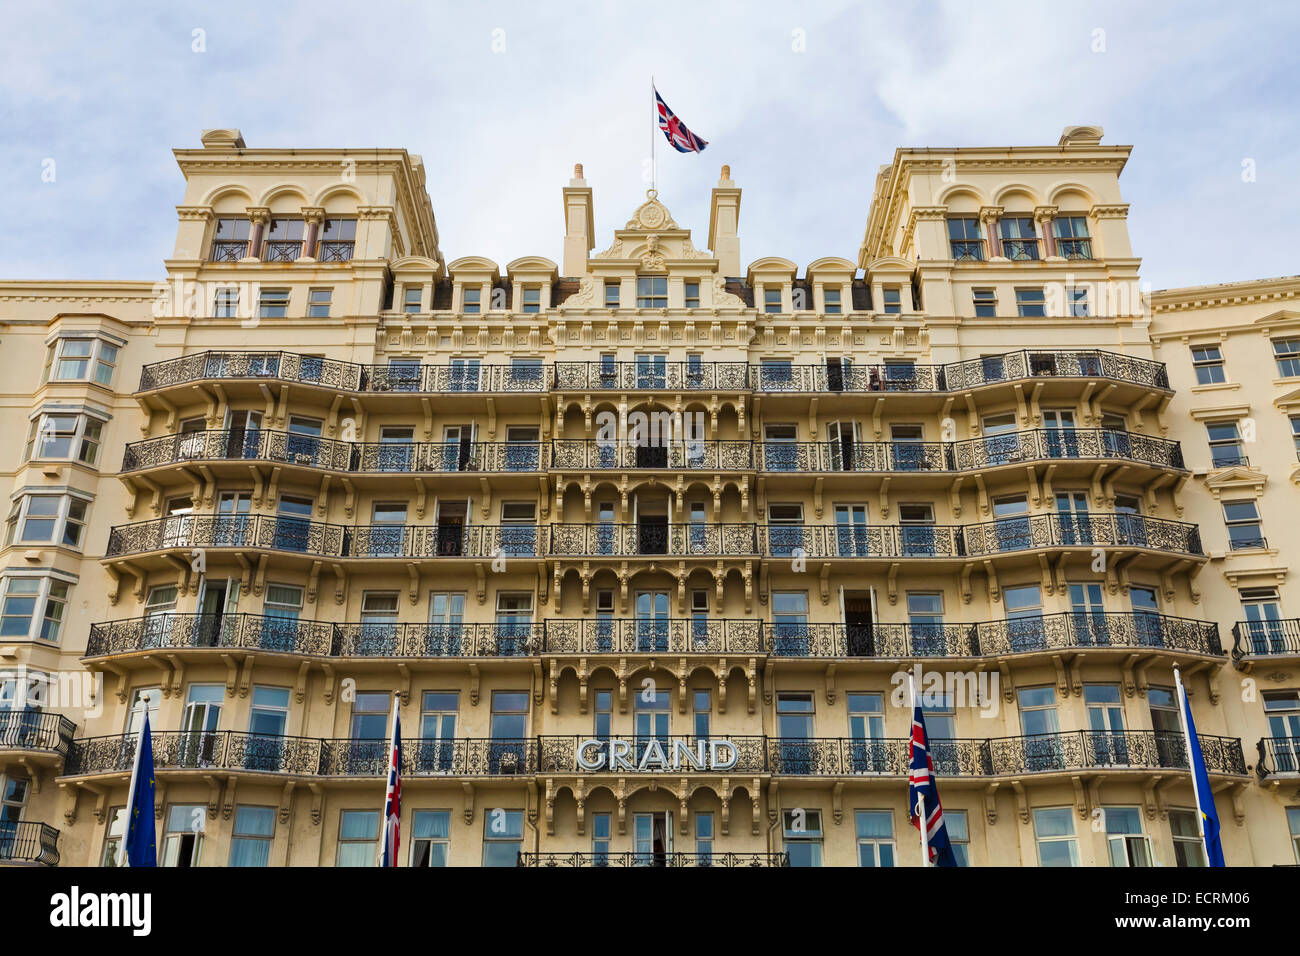 The Grand Hotel Victorian Hotel From 1864 At The Seafront Brighton Stock Photo Alamy